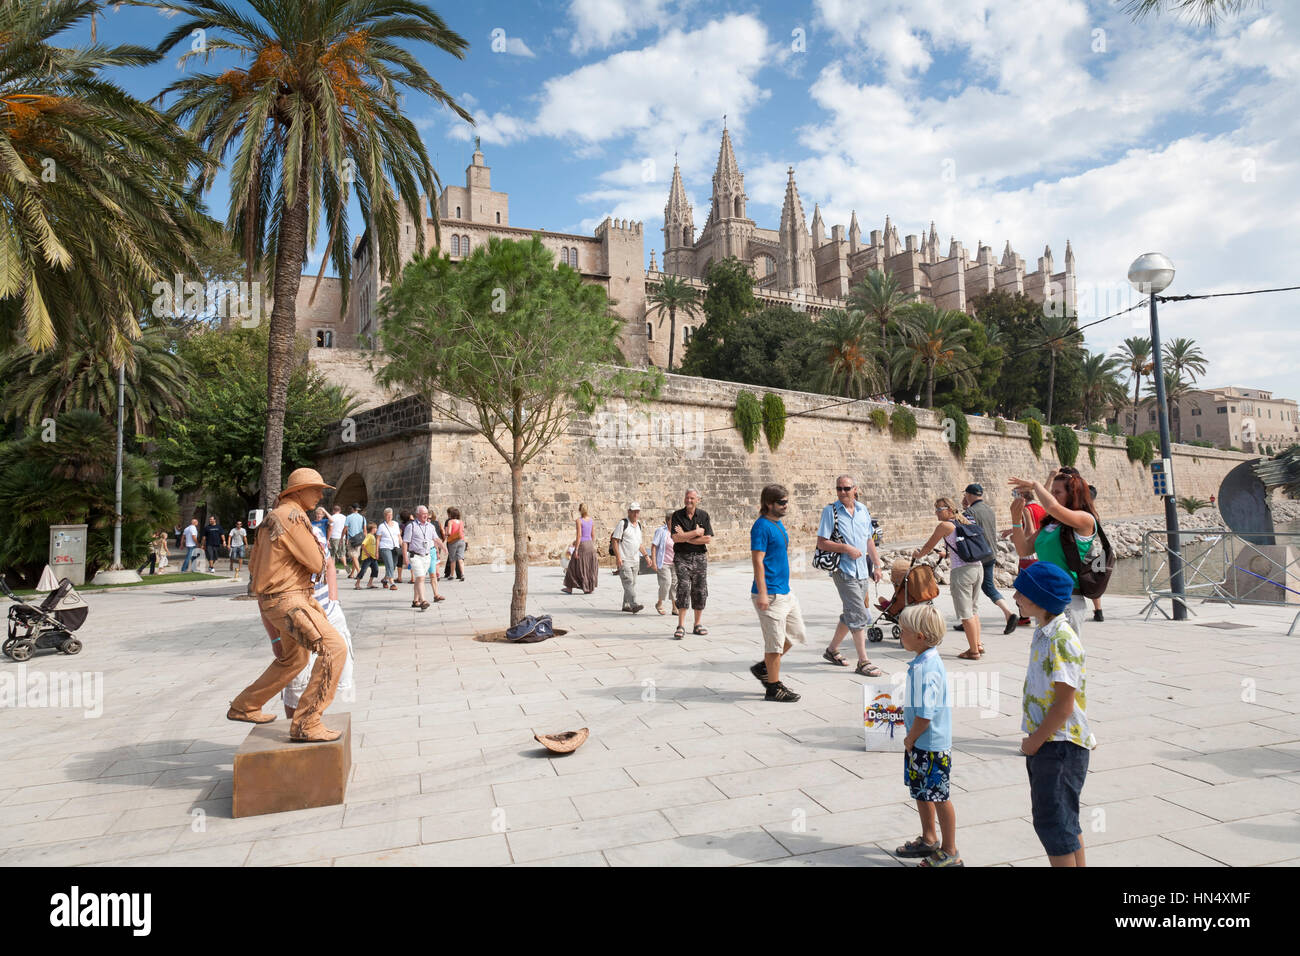 PALMA DE MALLORCA, SPAIN - OCTOBER, 9 : Street performer and passing tourists on the pedestrian area outside the Almudaina Palace and Cathedral in Pal Stock Photo